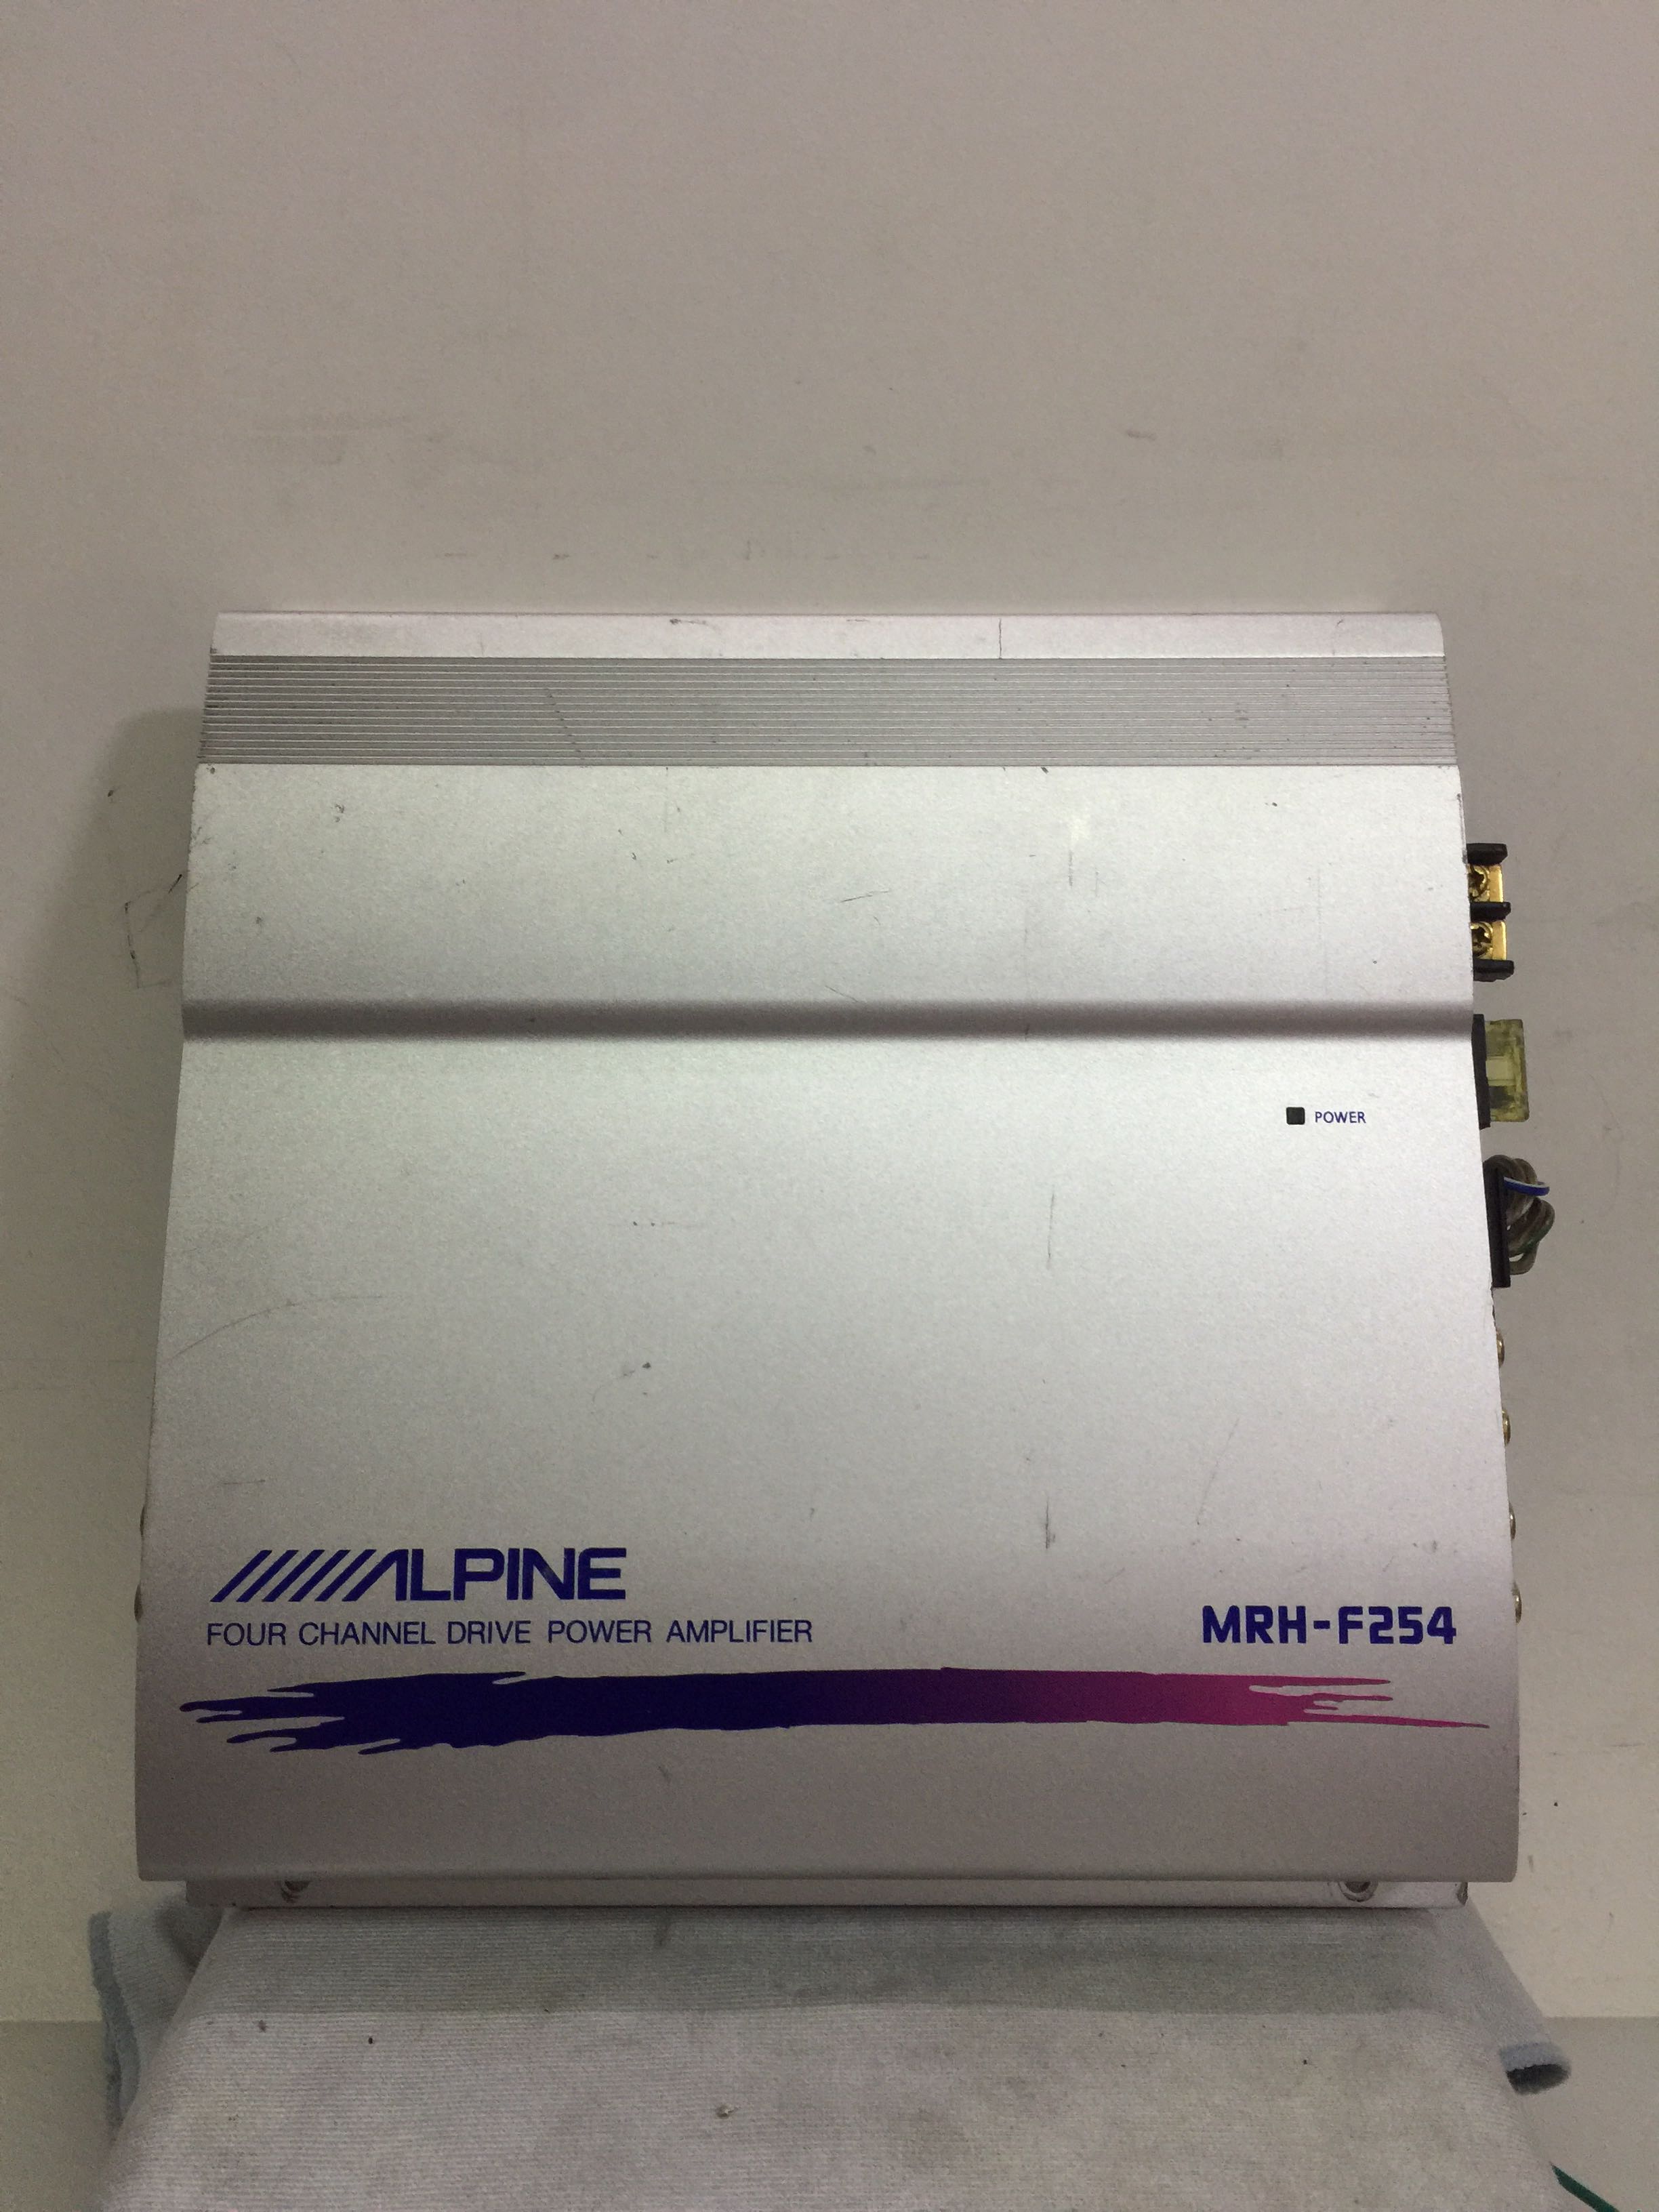 Alpine 4 Channel Drive Power Amplifier Mrh F254 Sub Amp Fast Car Accessories On Carousell